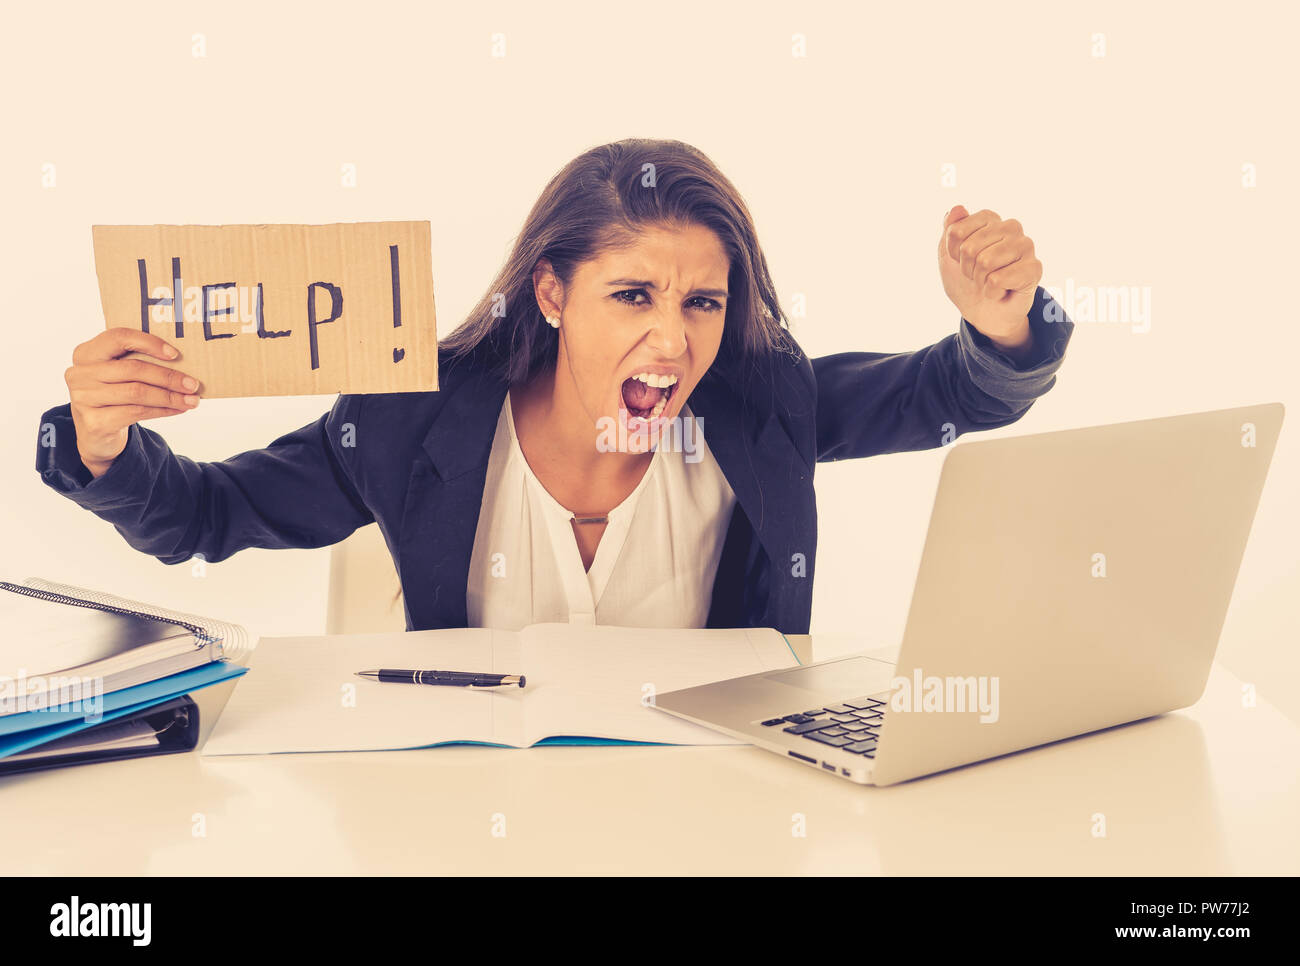 young-attractive-businesswoman-working-on-computer-laptop-suffering-stress-at-office-going-crazy-holding-a-help-sign-PW77J2.jpg